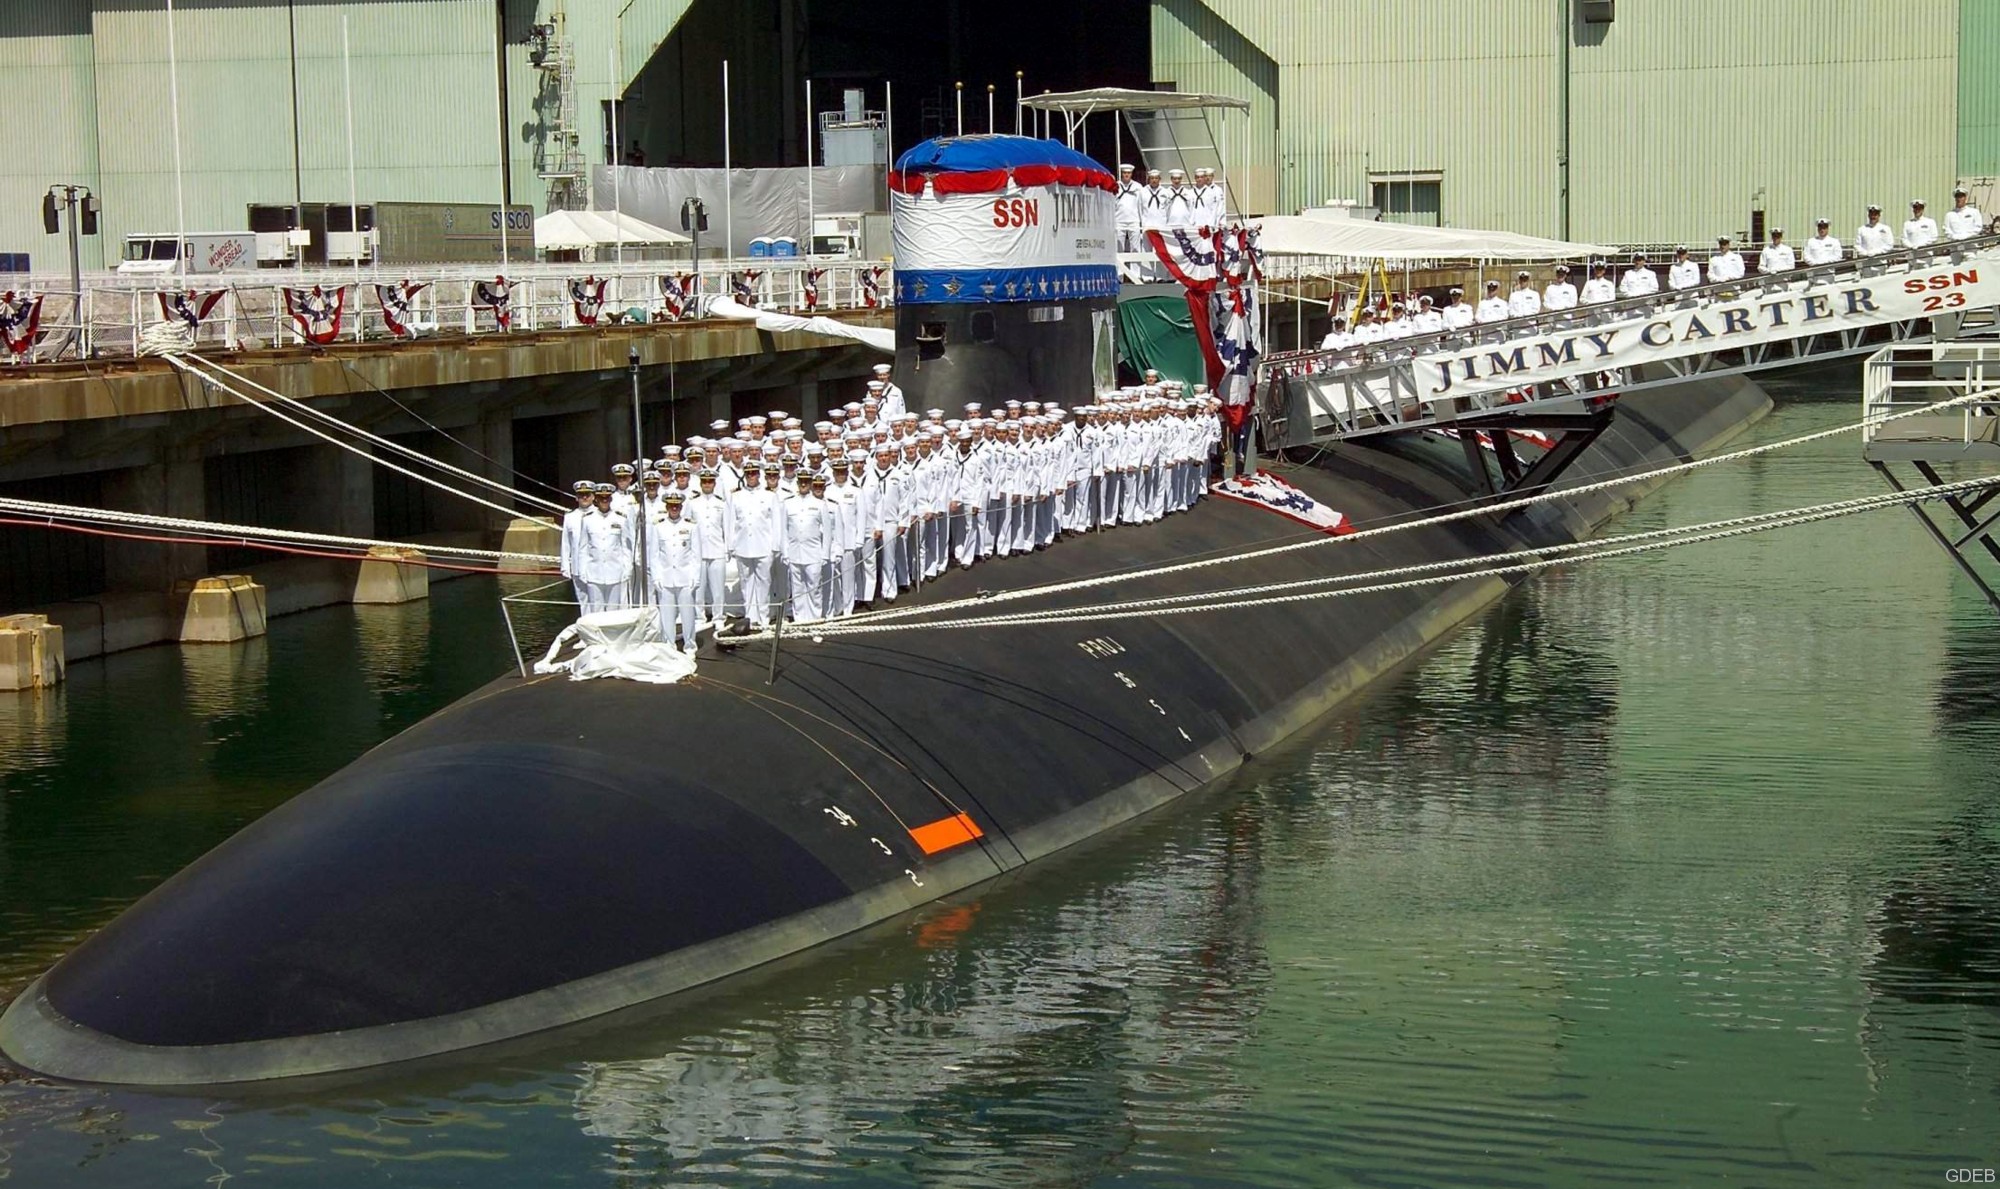 ssn-23 uss jimmy carter seawolf class attack submarine us navy christening general dynamics electric boat groton 09